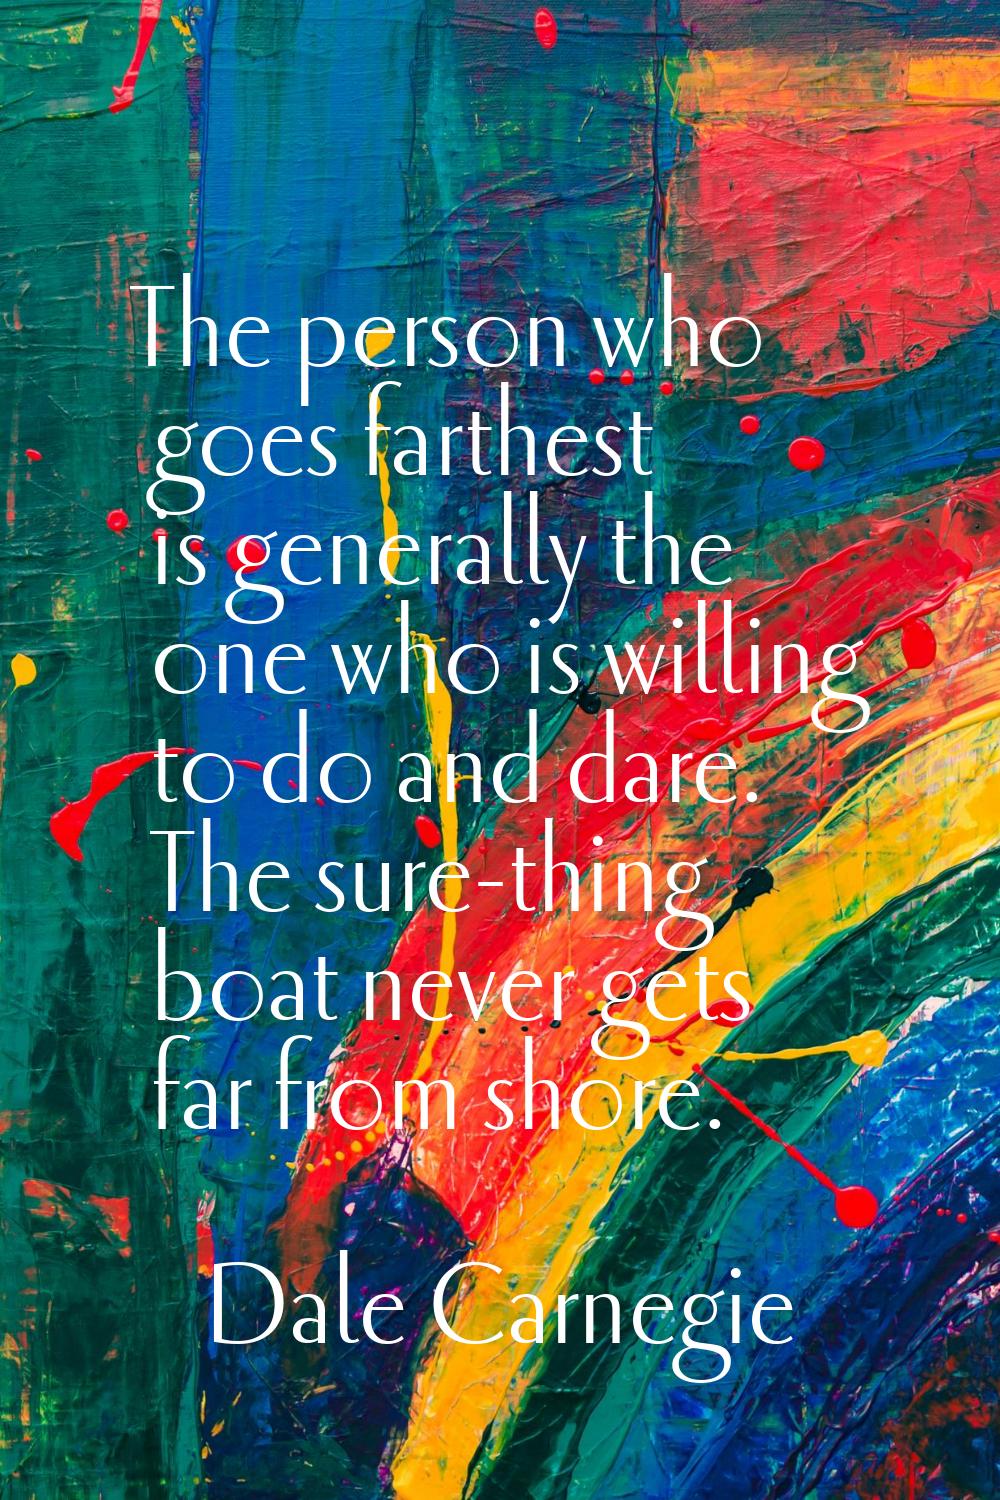 The person who goes farthest is generally the one who is willing to do and dare. The sure-thing boa